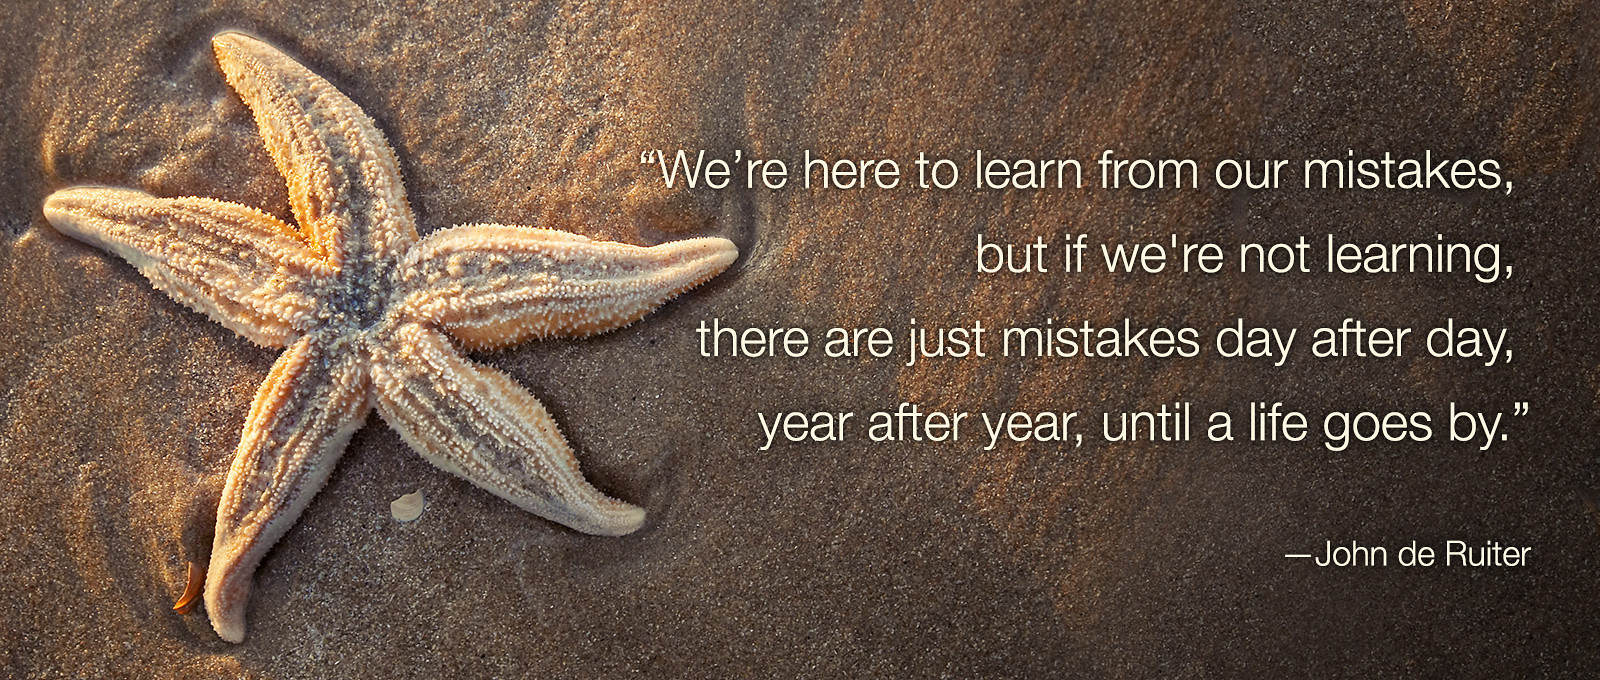 Quotes About Learning From Mistakes. QuotesGram